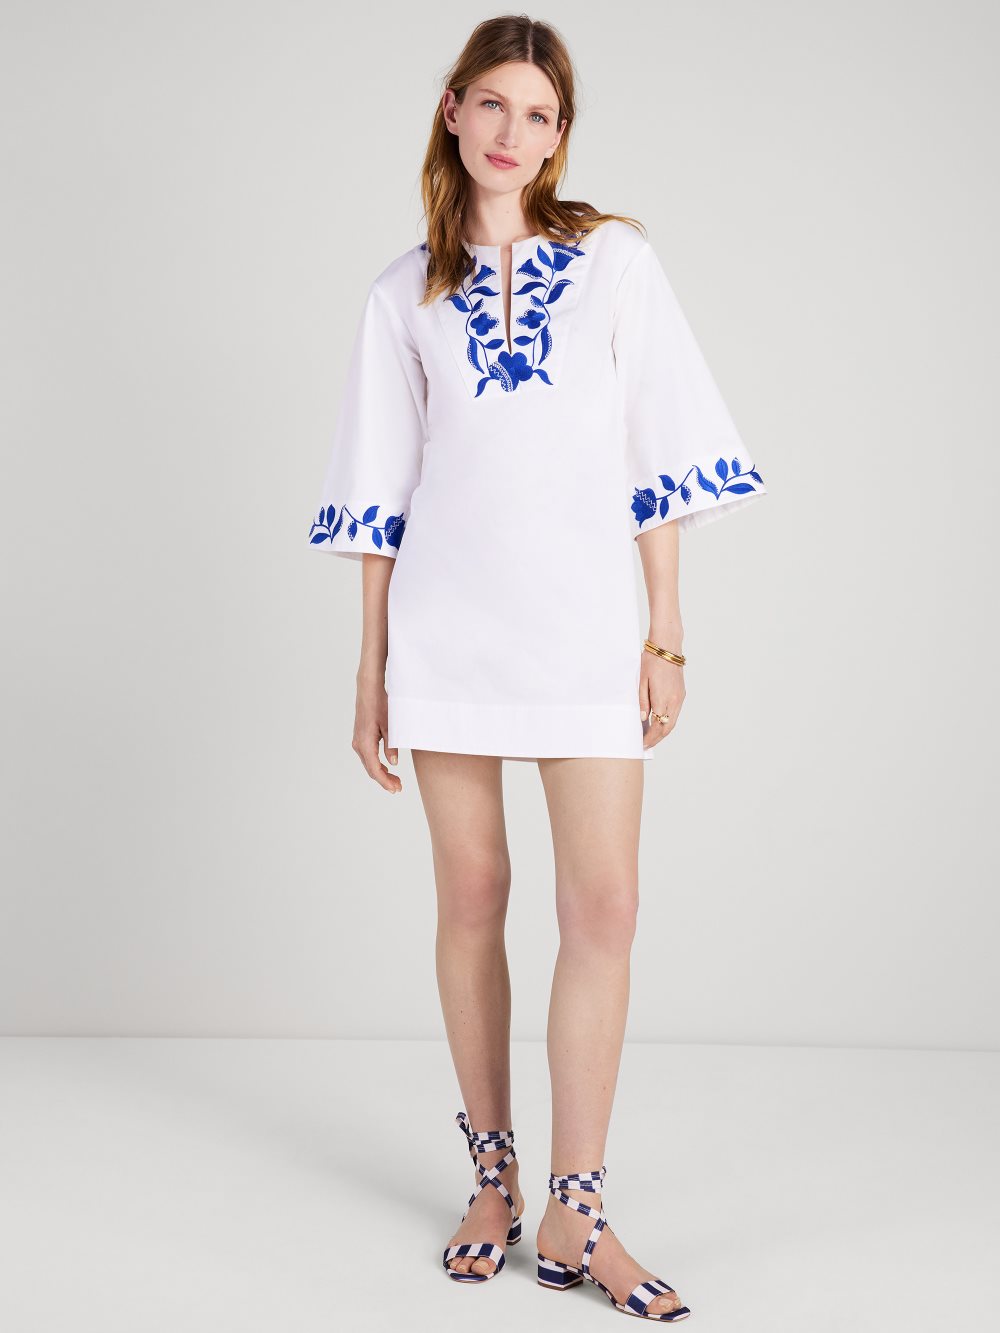 Women's fresh white embroidered zigzag floral tunic dress | Kate Spade